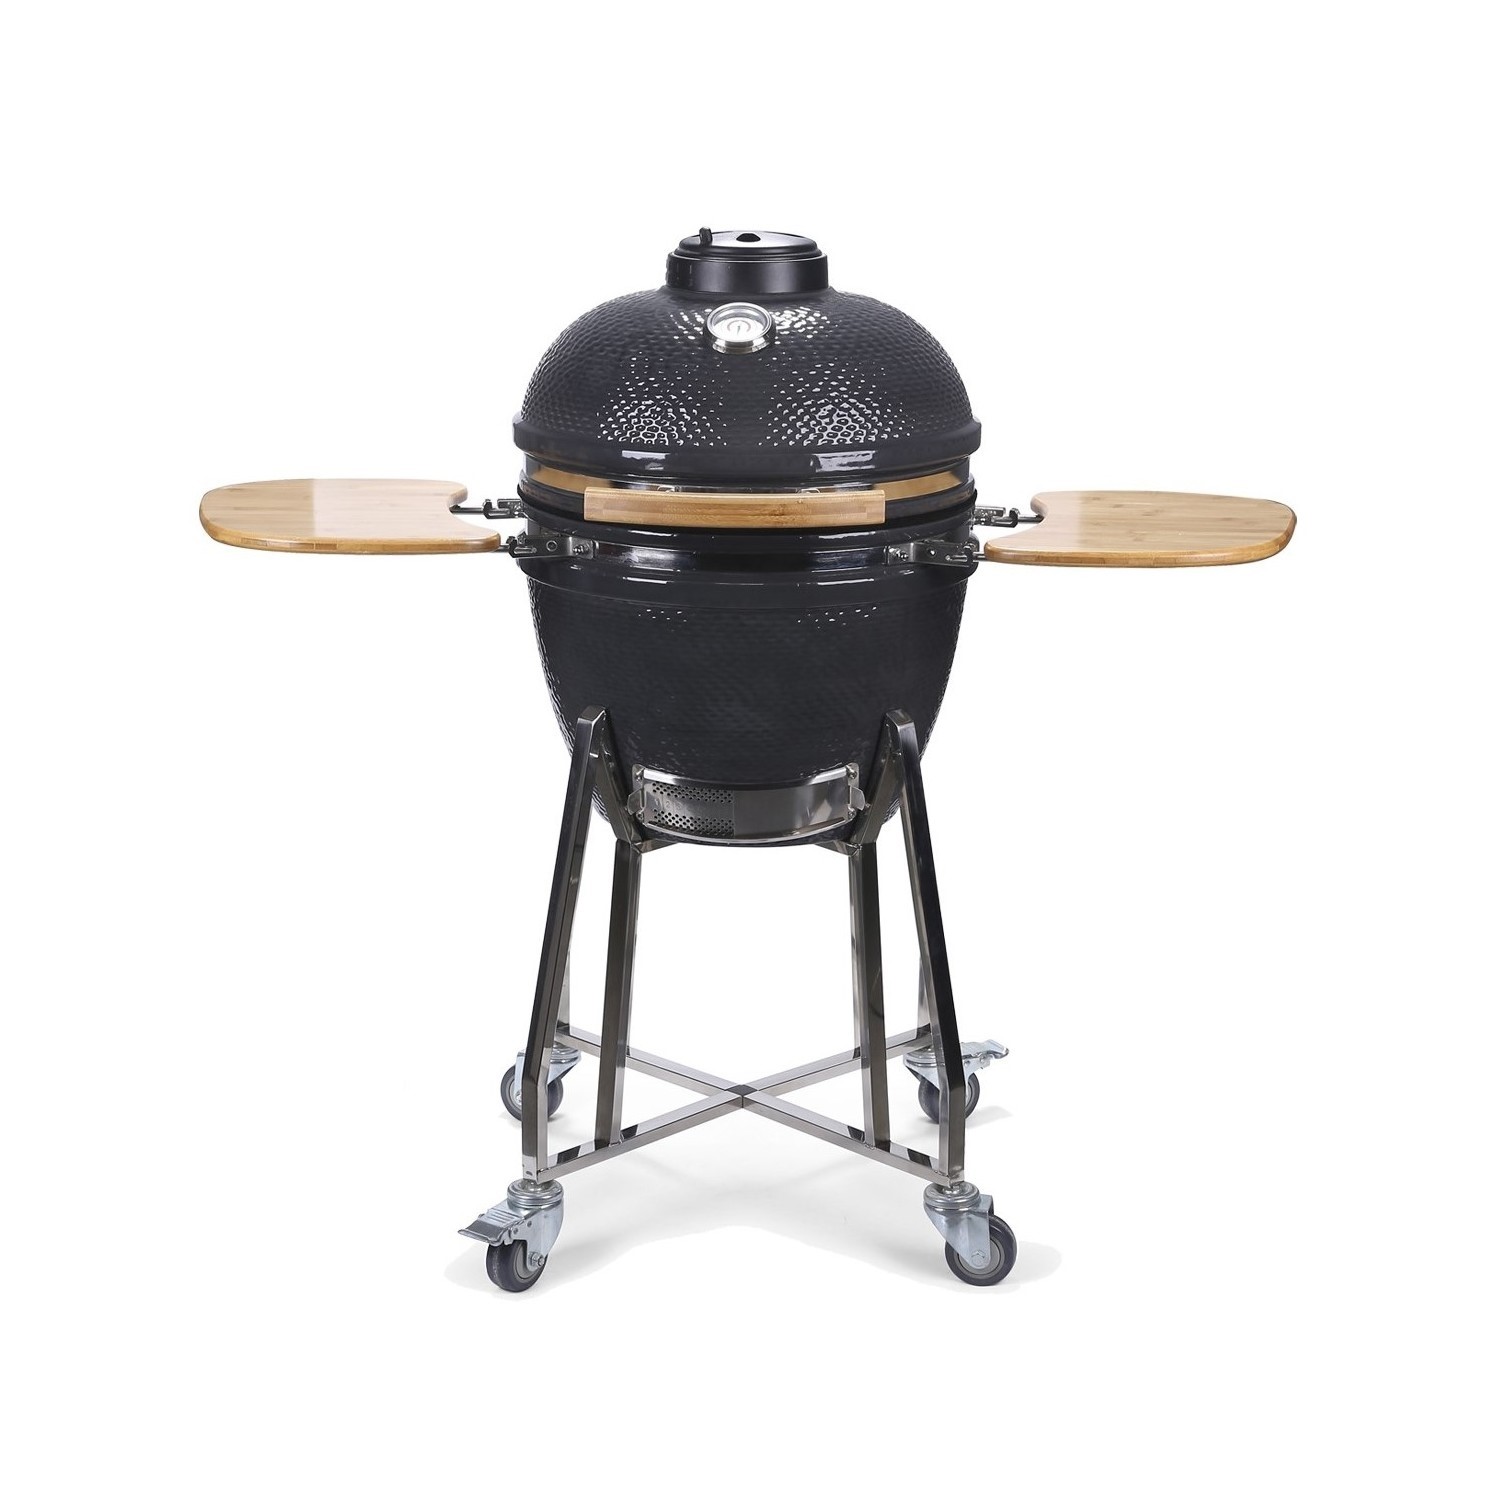 Refurbished electriQ18 Inch Charcoal Ceramic Kamado Style Kettle Grill Egg BBQ in Grey with Wooden Shelves